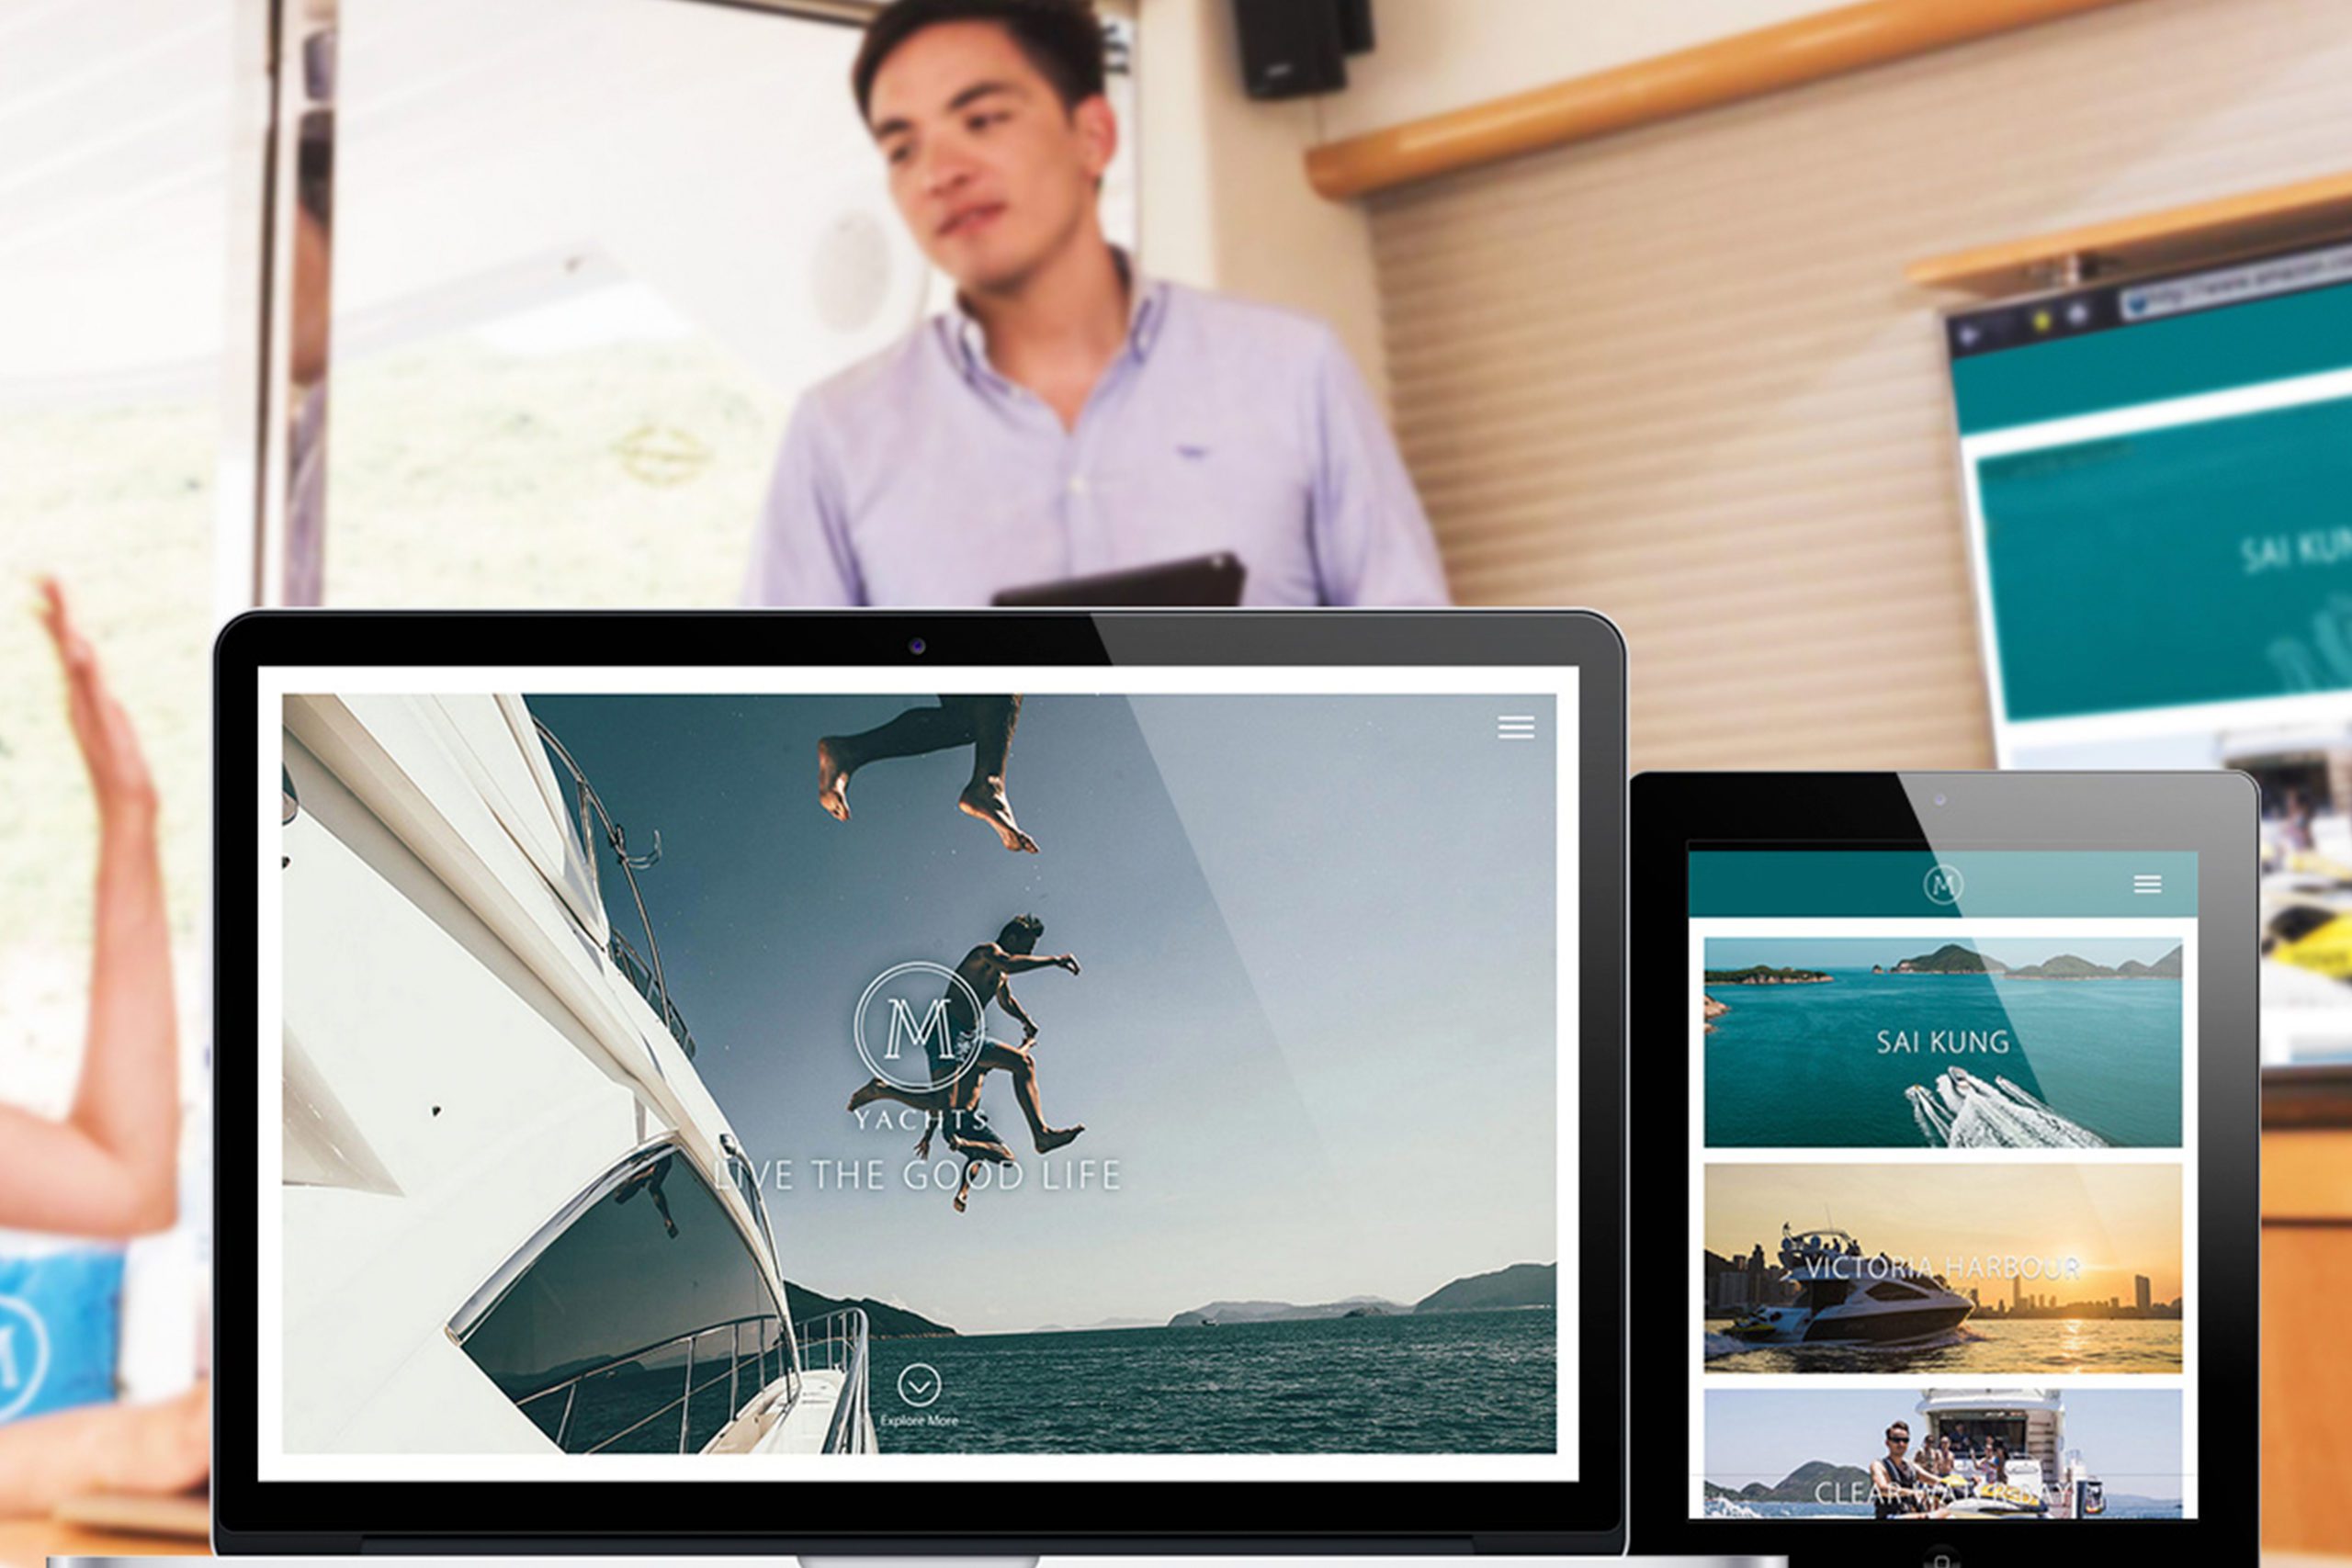 M Yachts Branding Website On Laptop and Tablet